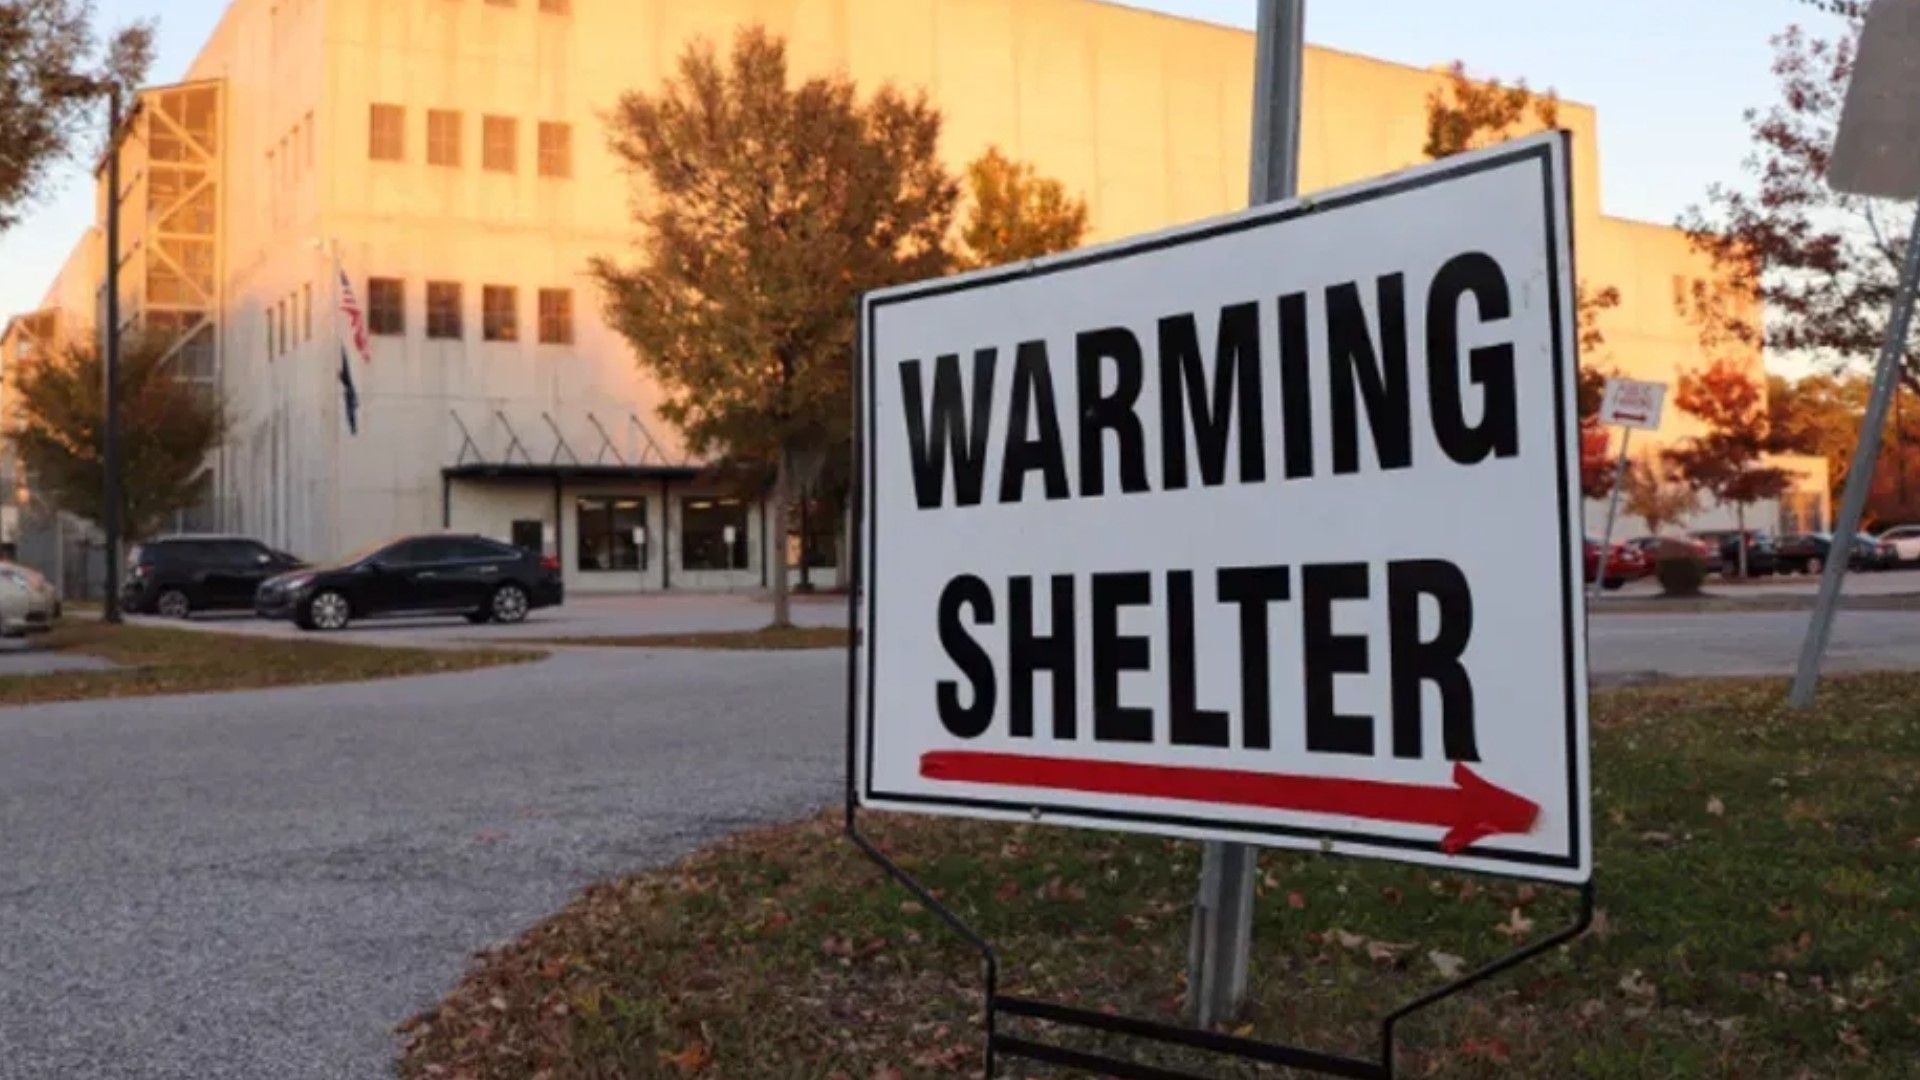 As temperatures continue to drop and winter weather comes to Arkansas, warming centers across the Natural State are opening just in time to help.